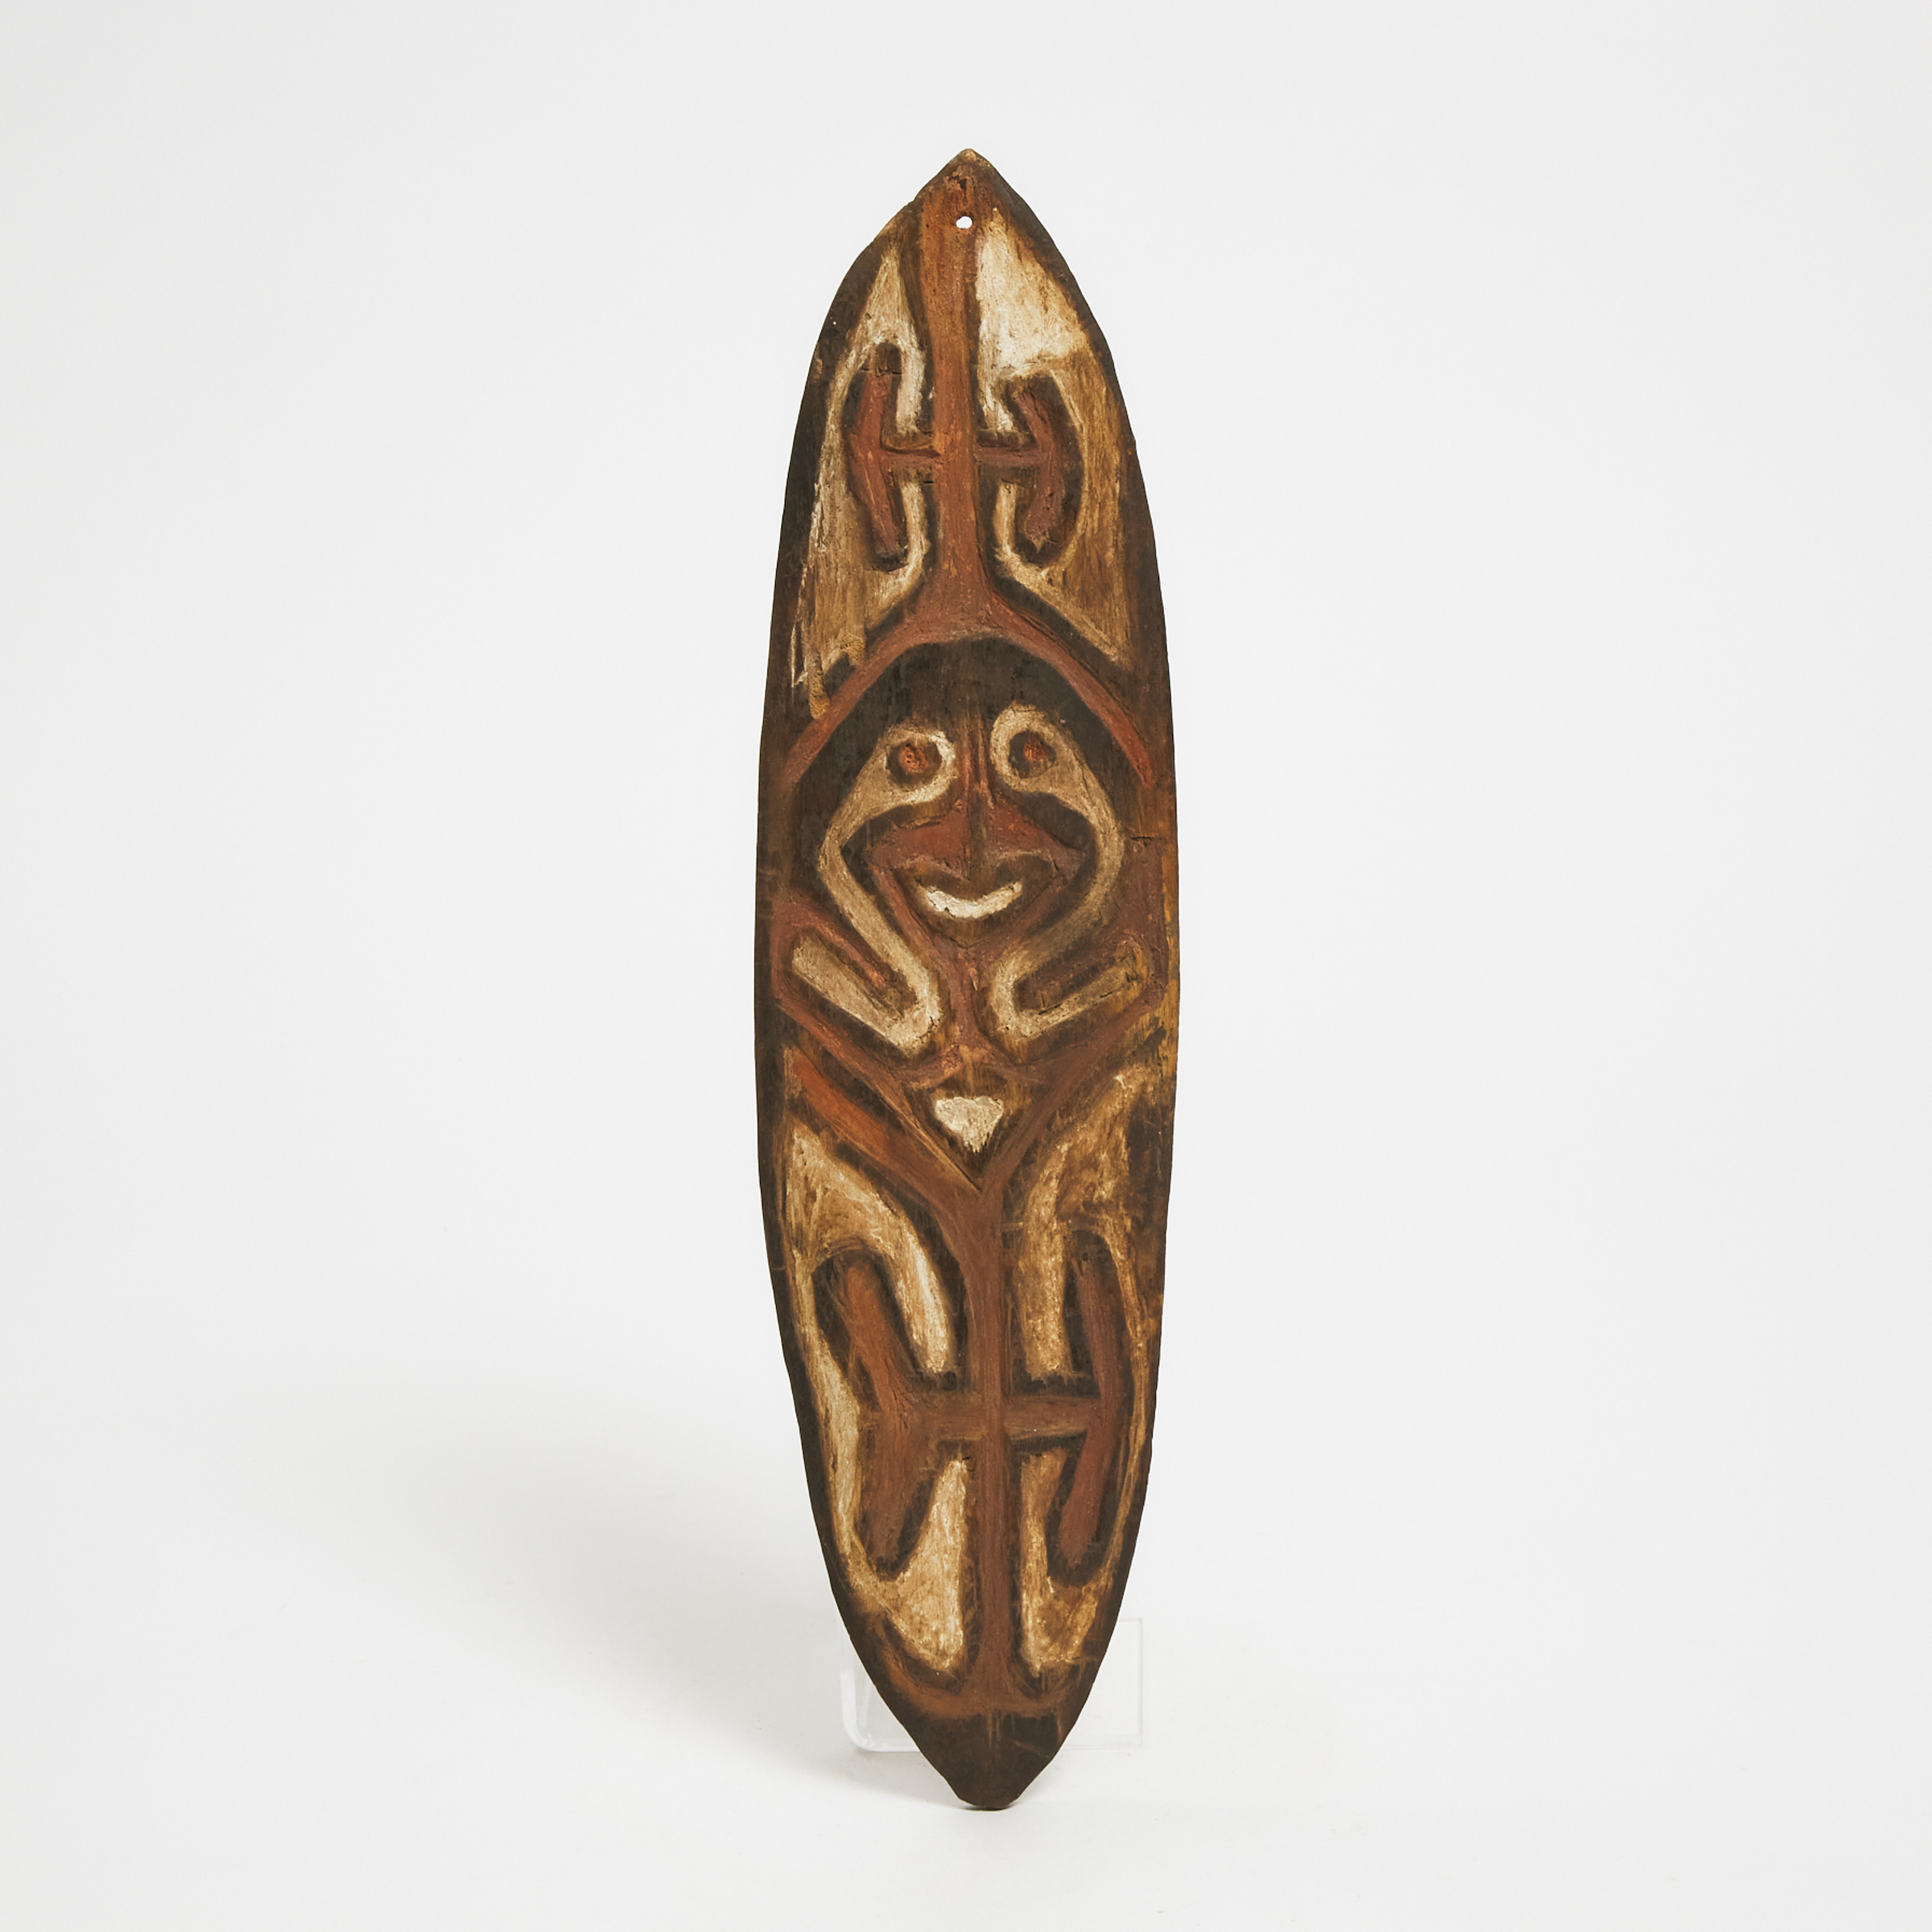 Papuan Gulf Bull Roarer, Papua New Guinea, mid to late 20th century